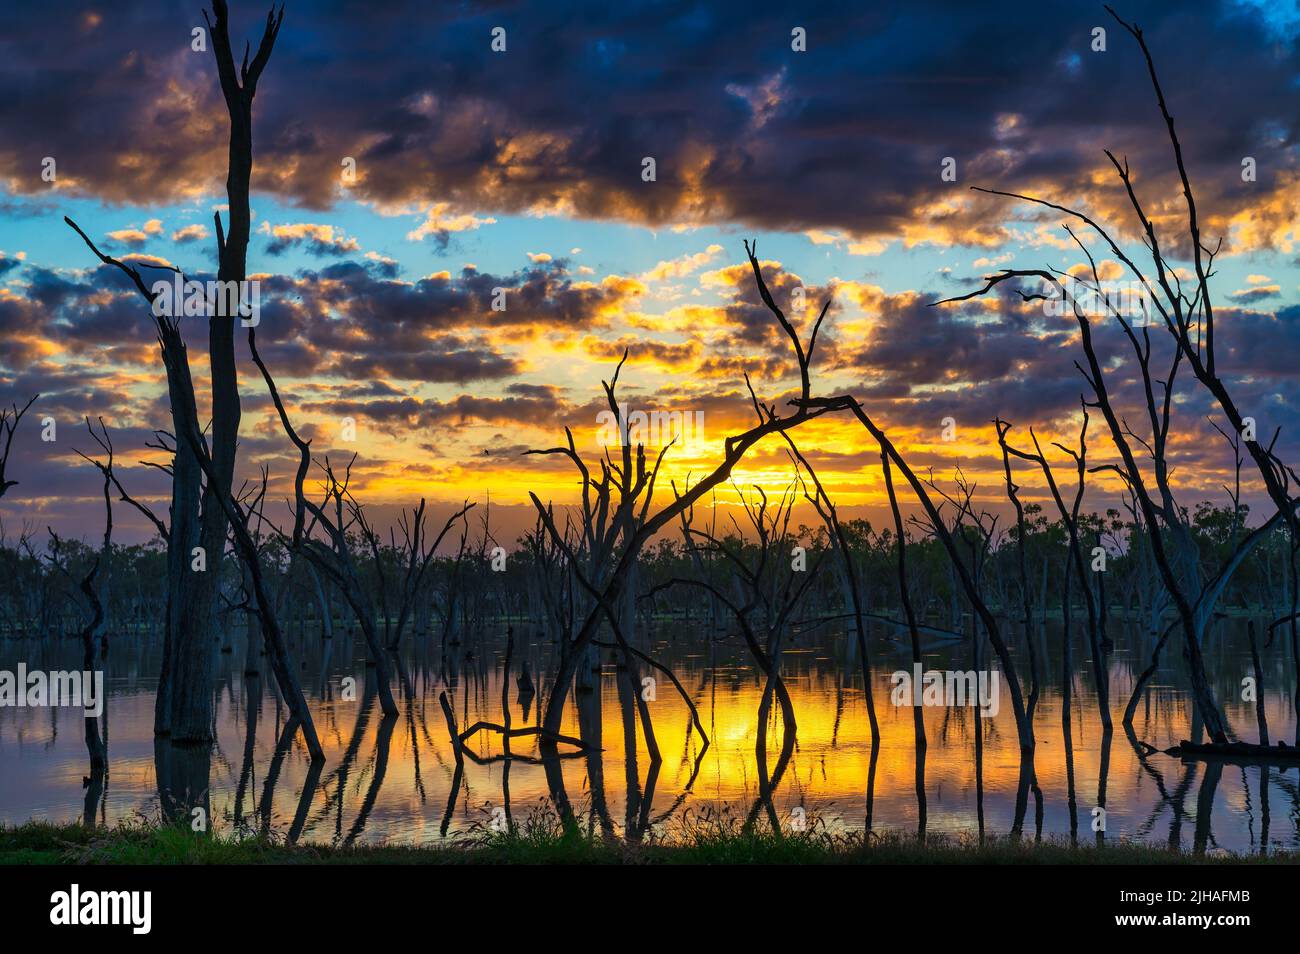 A scenic sunrise over a natural hot spring featuring wading, silhouetted old dead gum trees near Barcaldine in western Queensland in Australia. Stock Photo